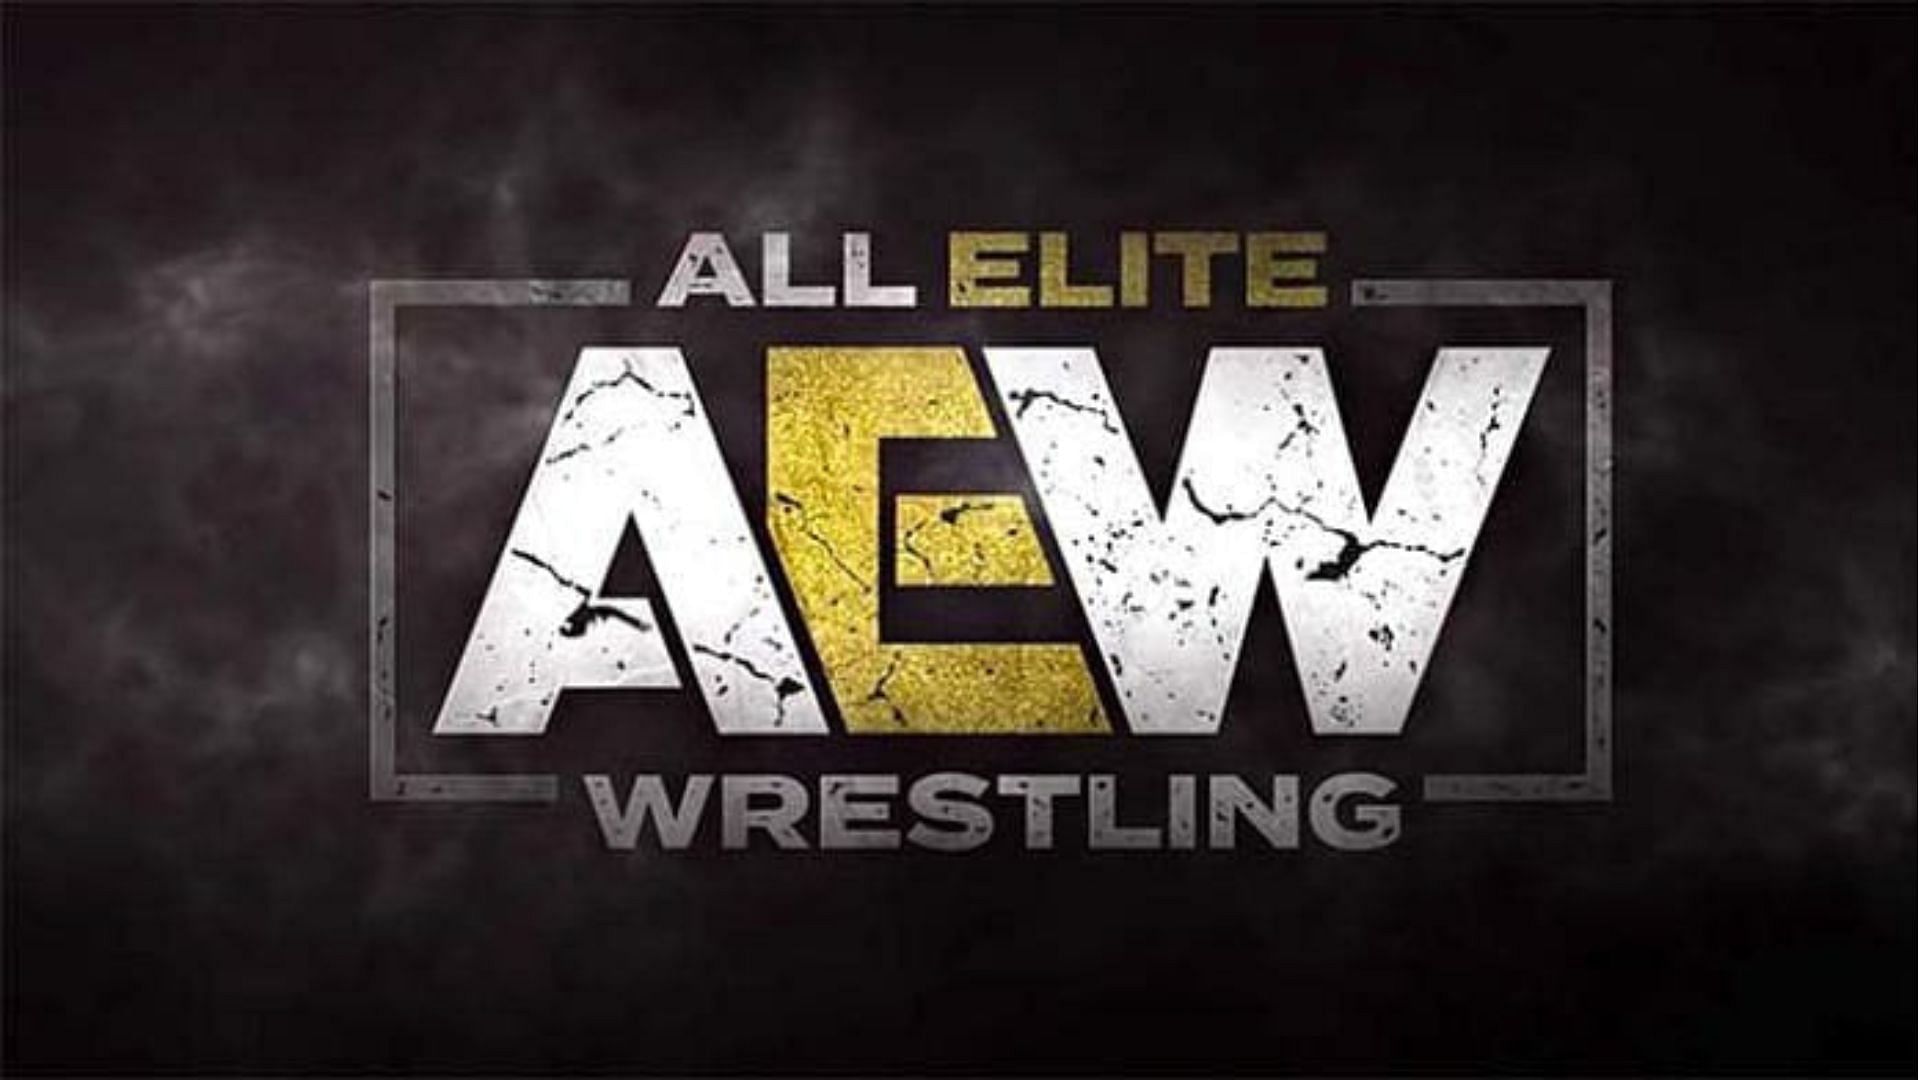 Find out which former AEW star had announced her engagement?